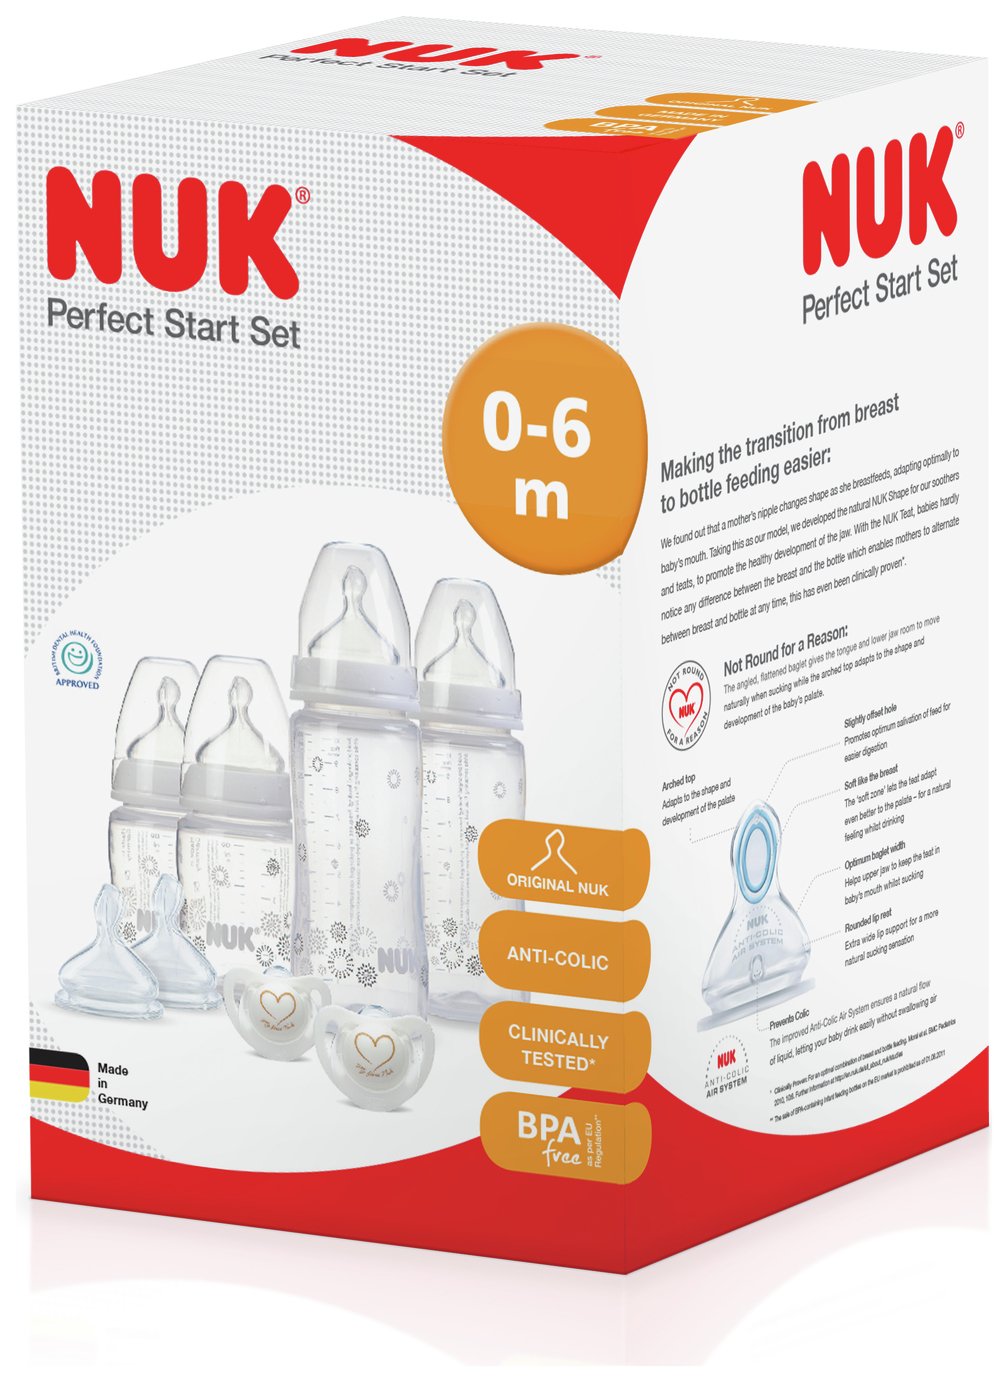 NUK First Choice Perfect Starter Set Review